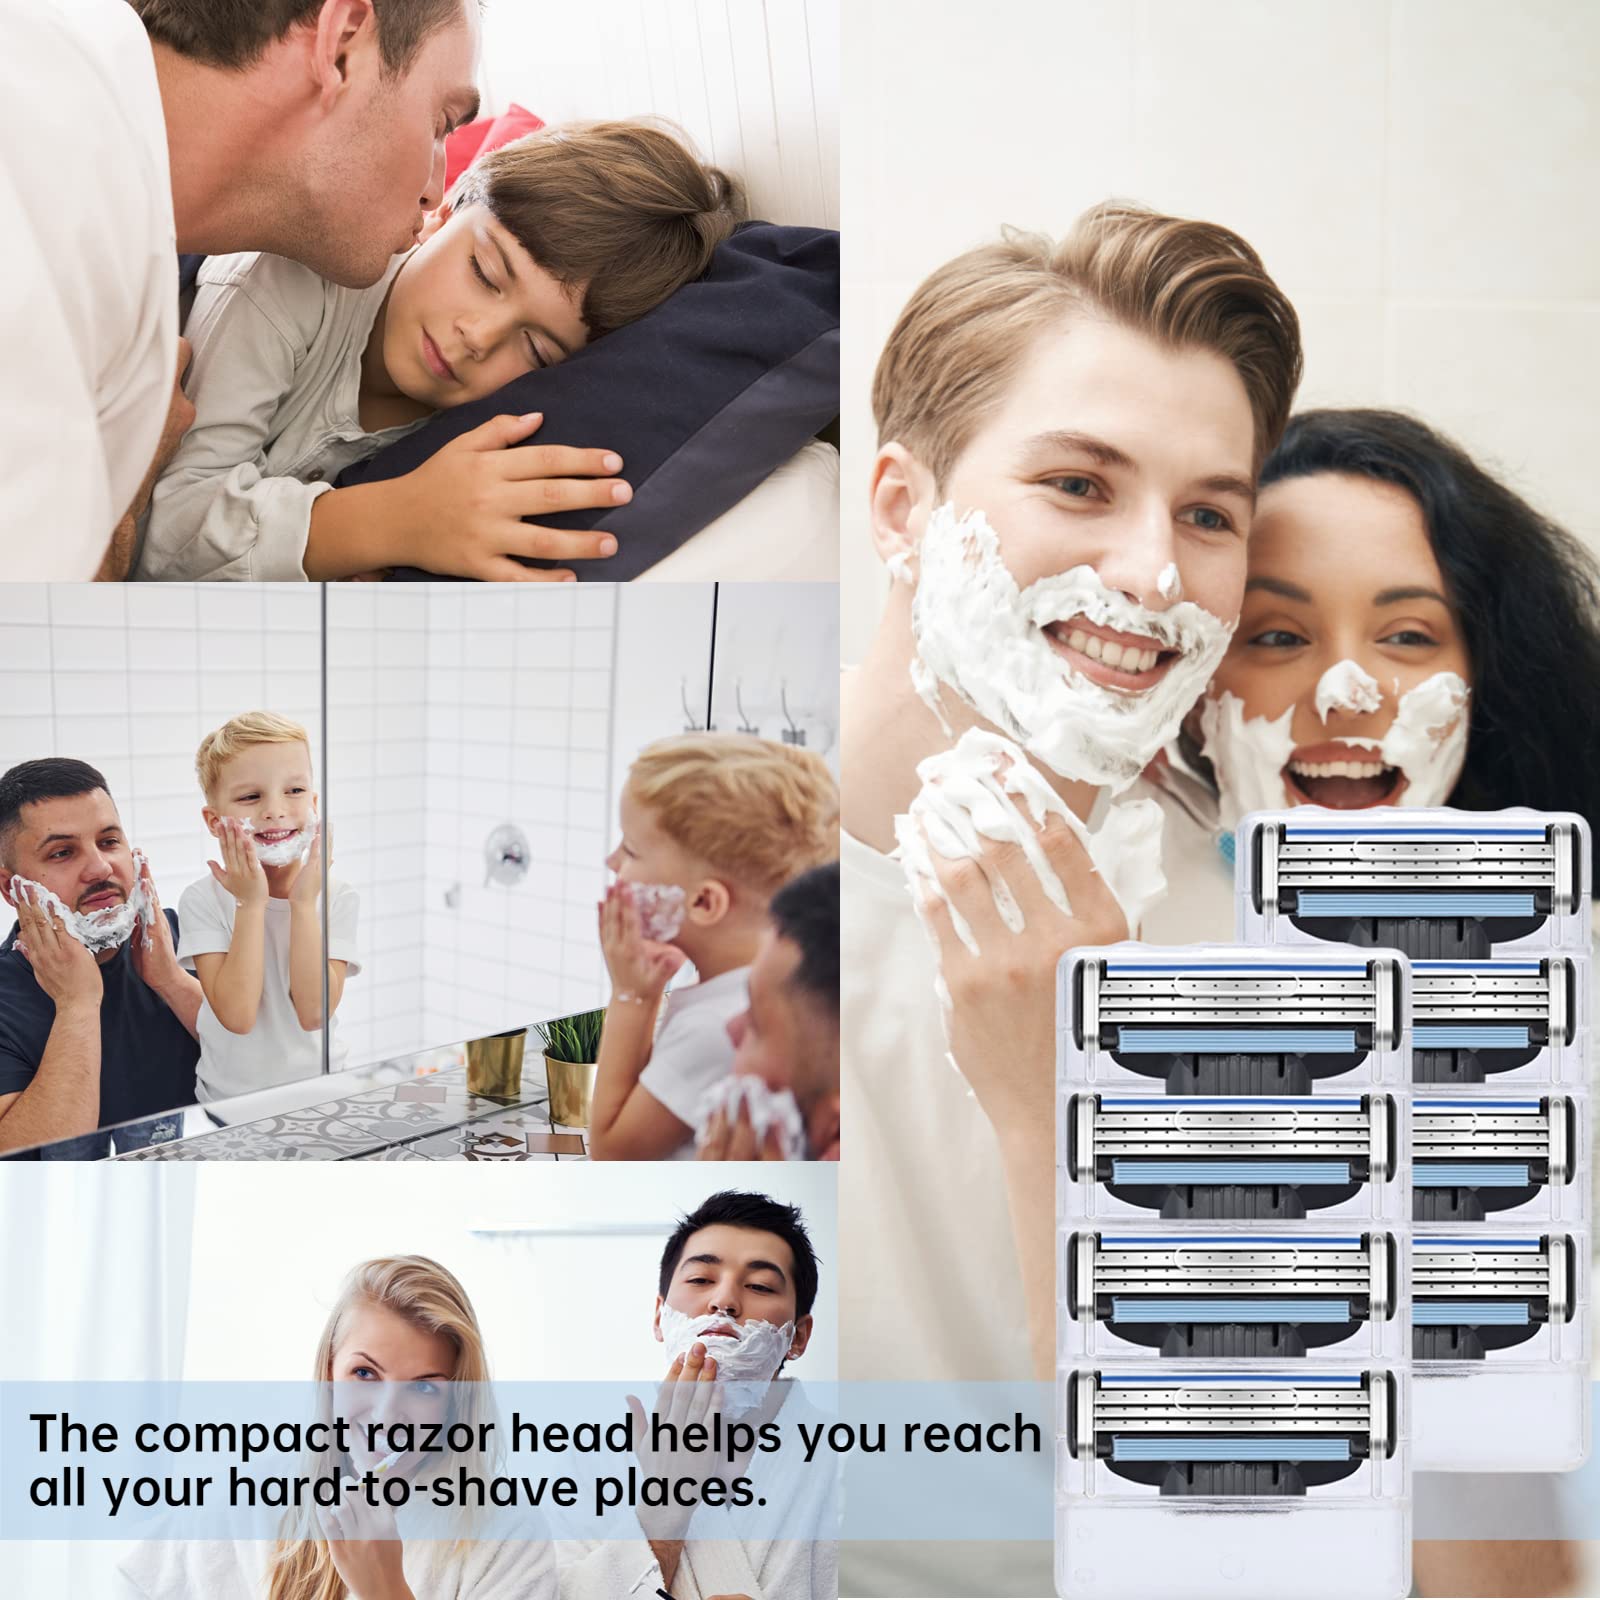 Razor Blades Refill for Mach 3, Mens Mach 3 Replacement Razor Blades for Gillette, Turbo Razor Blades Refills for Mach 3 - The Best Father's Day Gift